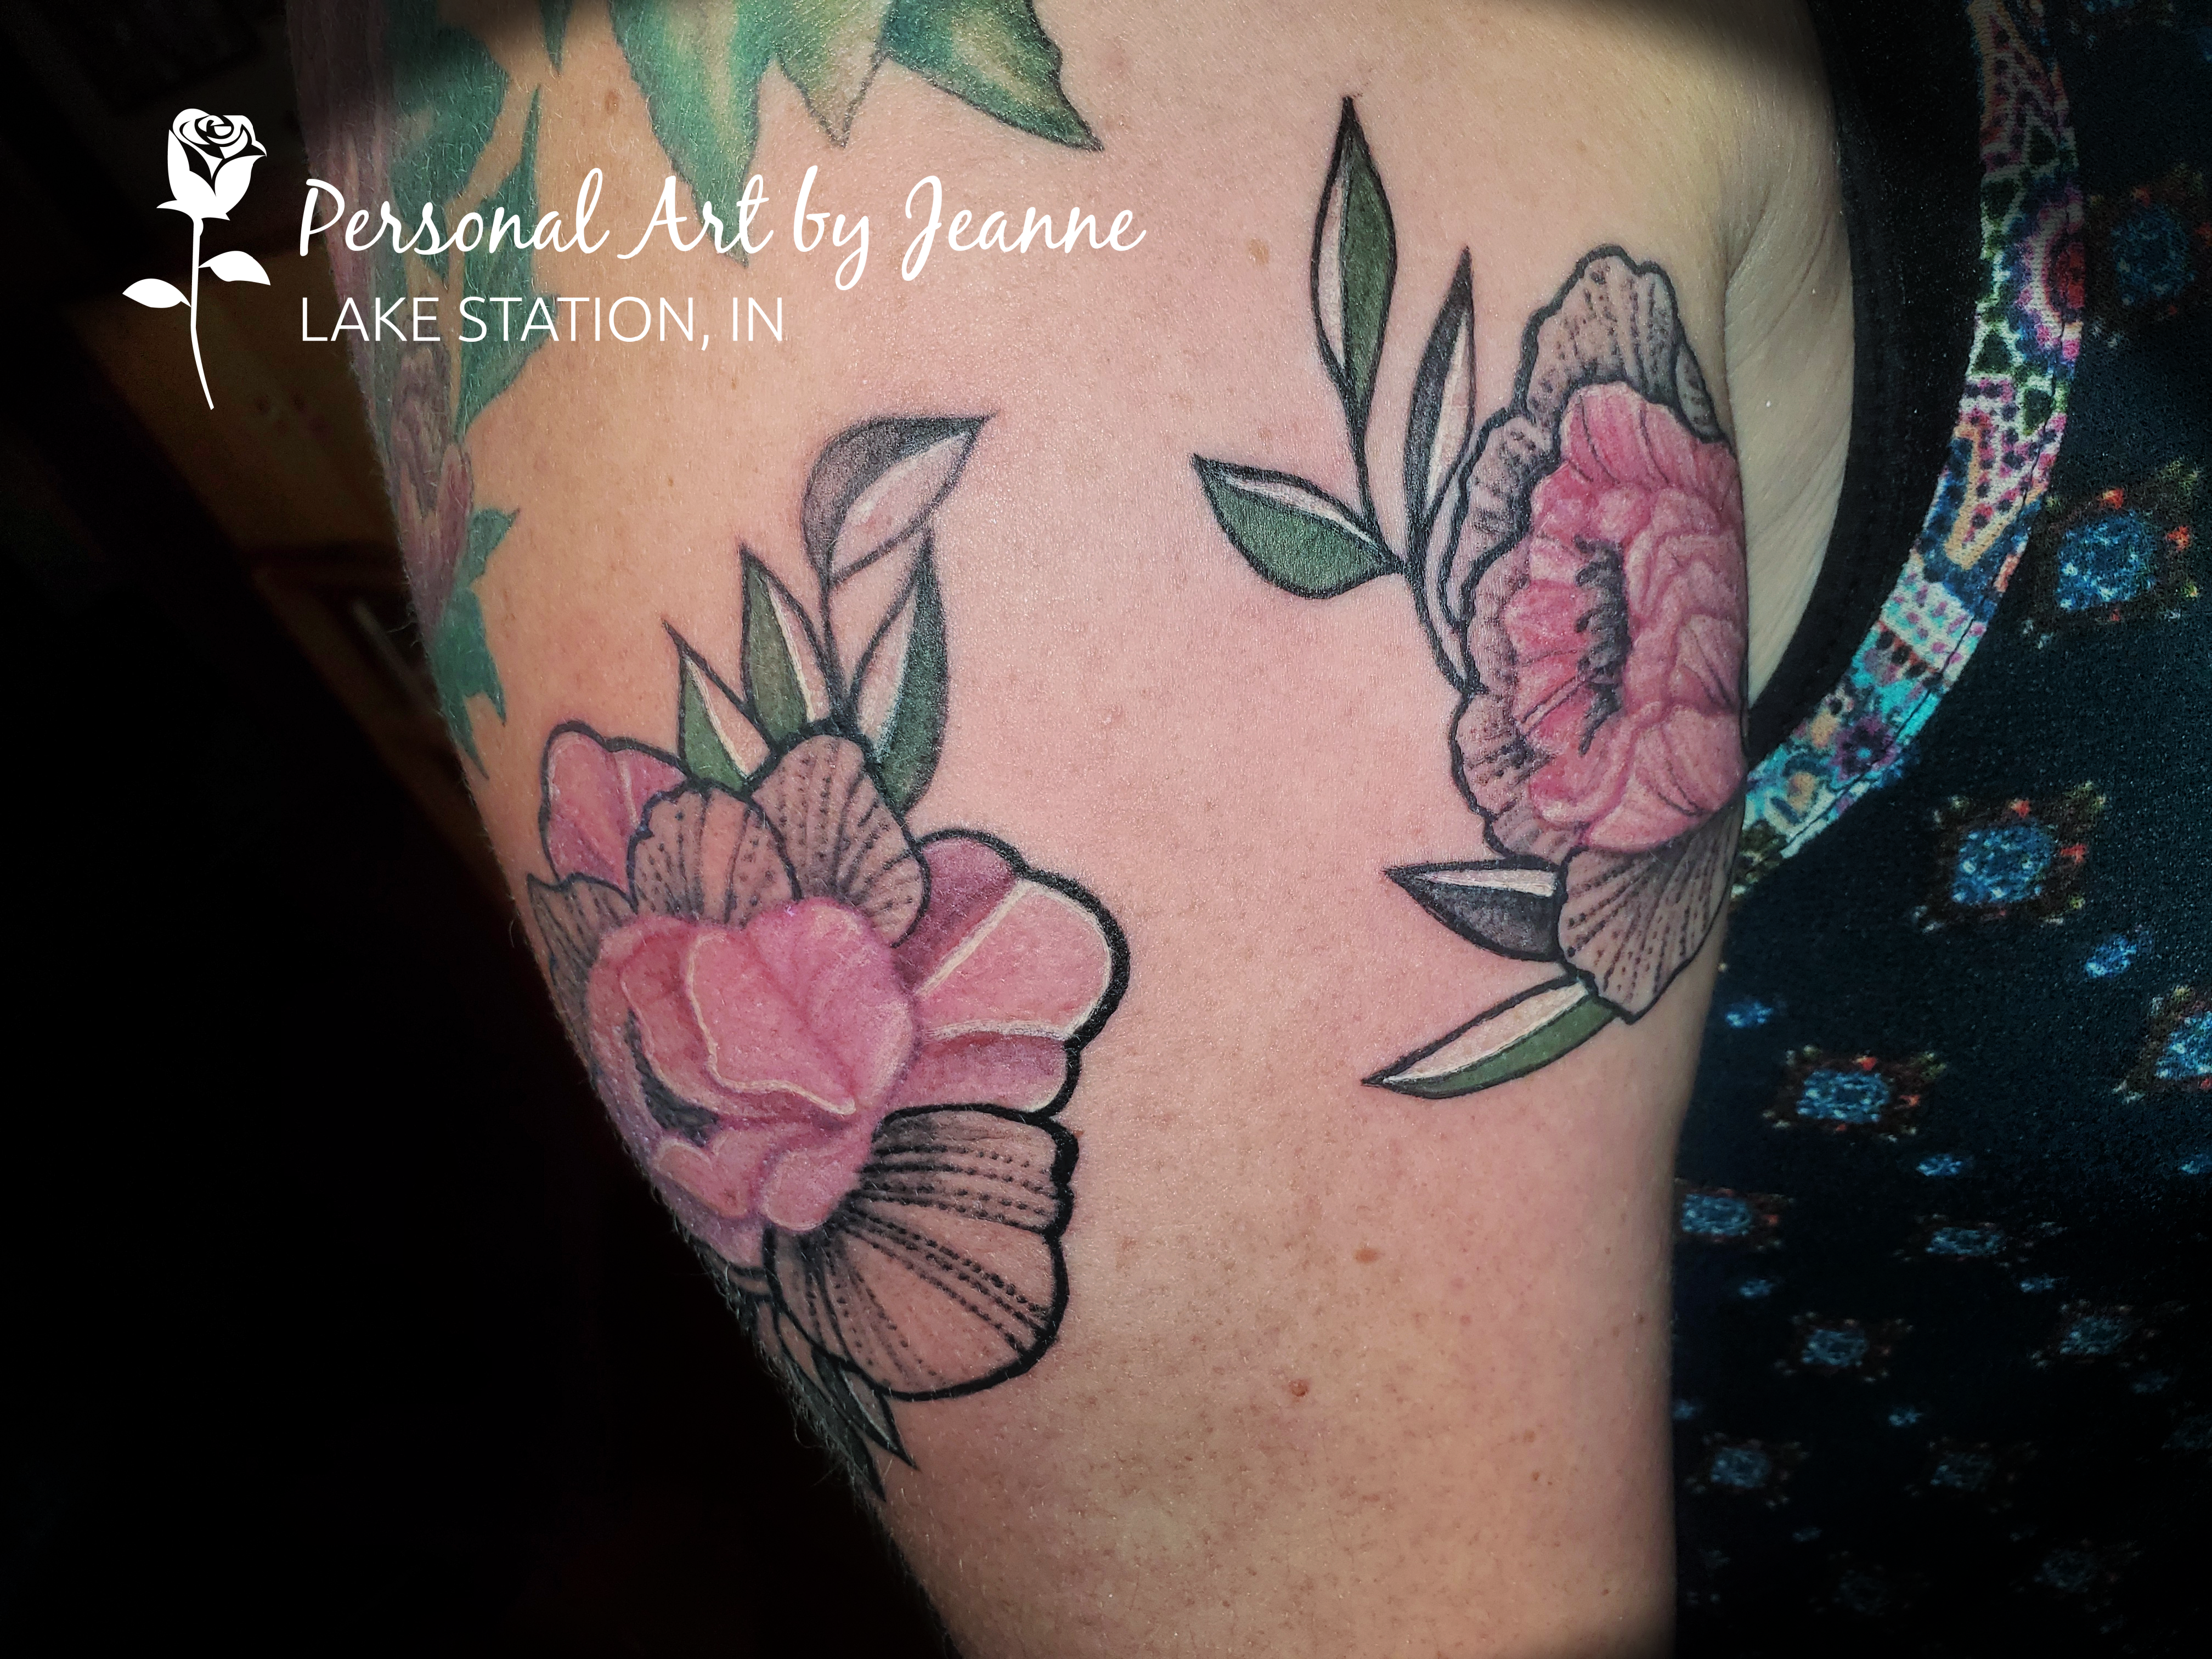 peony tattoos on an arm done by Jeanne at Personal Art